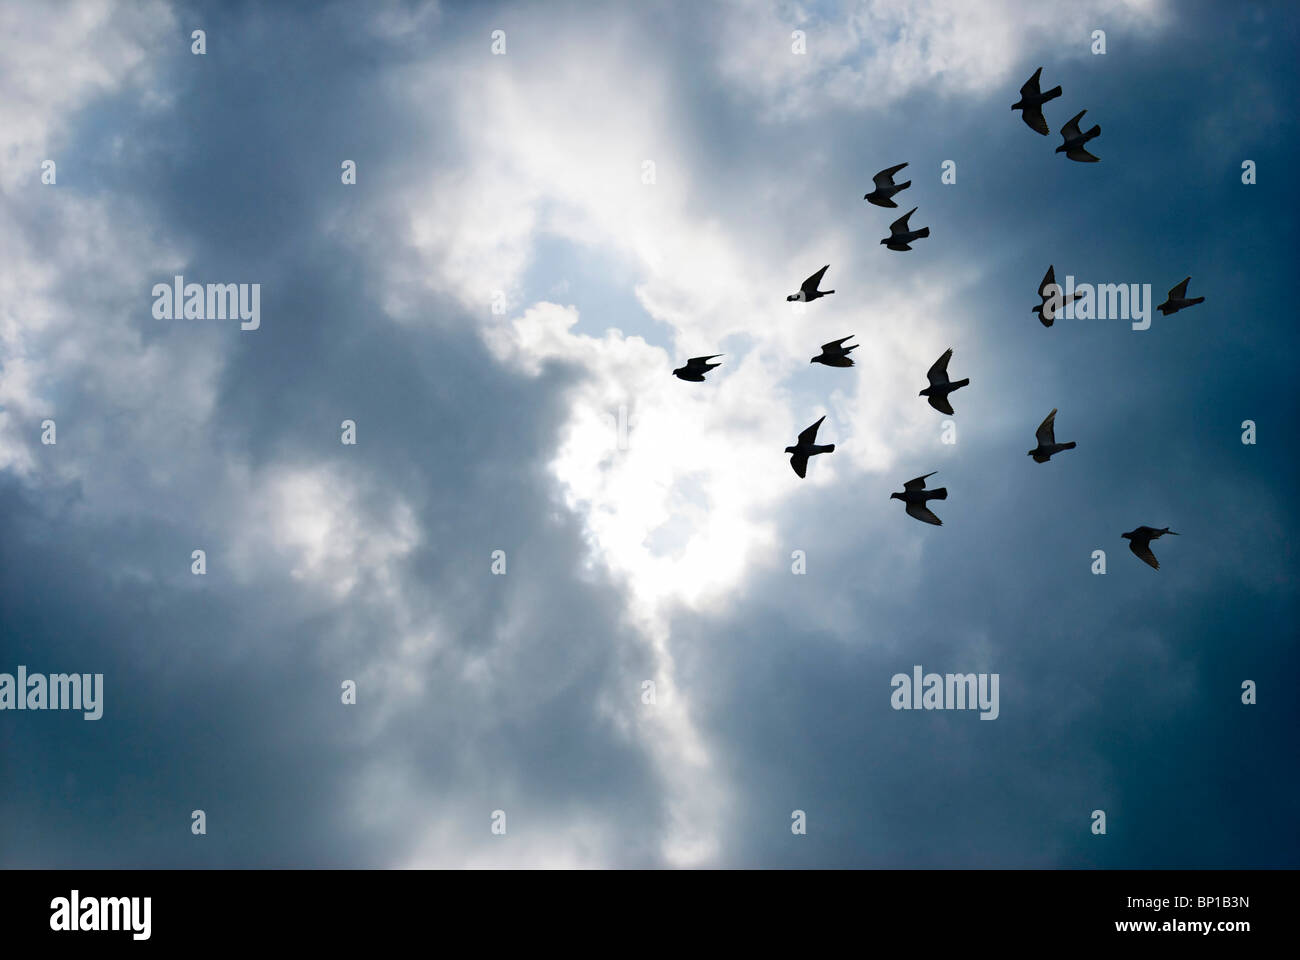 Birds flying breakthrough gray clouds Concept of fly overcome. Stock Photo